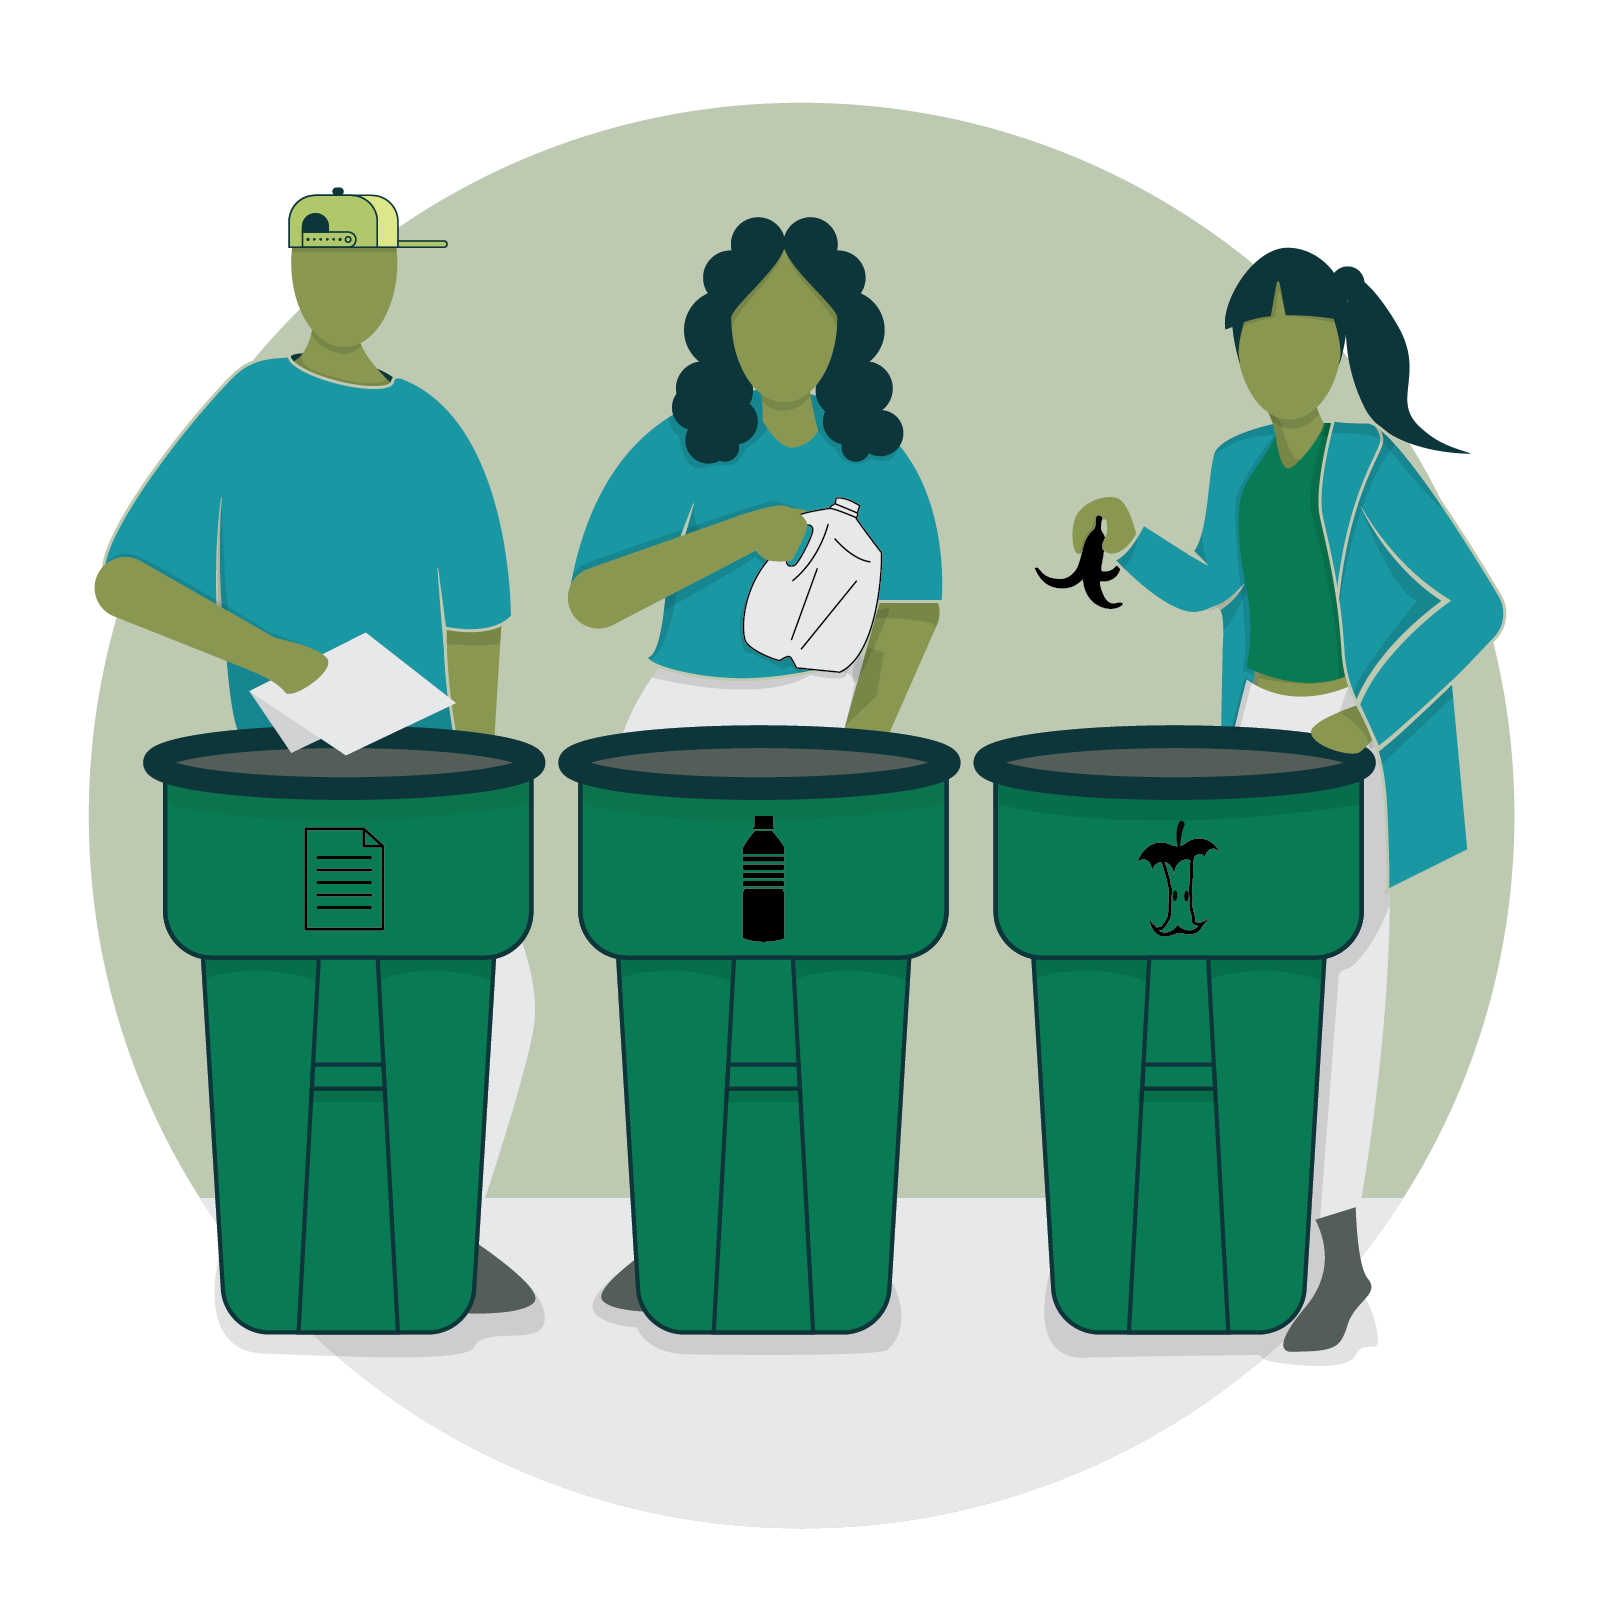 Illustration of three people each standing behind a recycling bin, and each of them are throwing away a piece of waste into the appropriate bin.